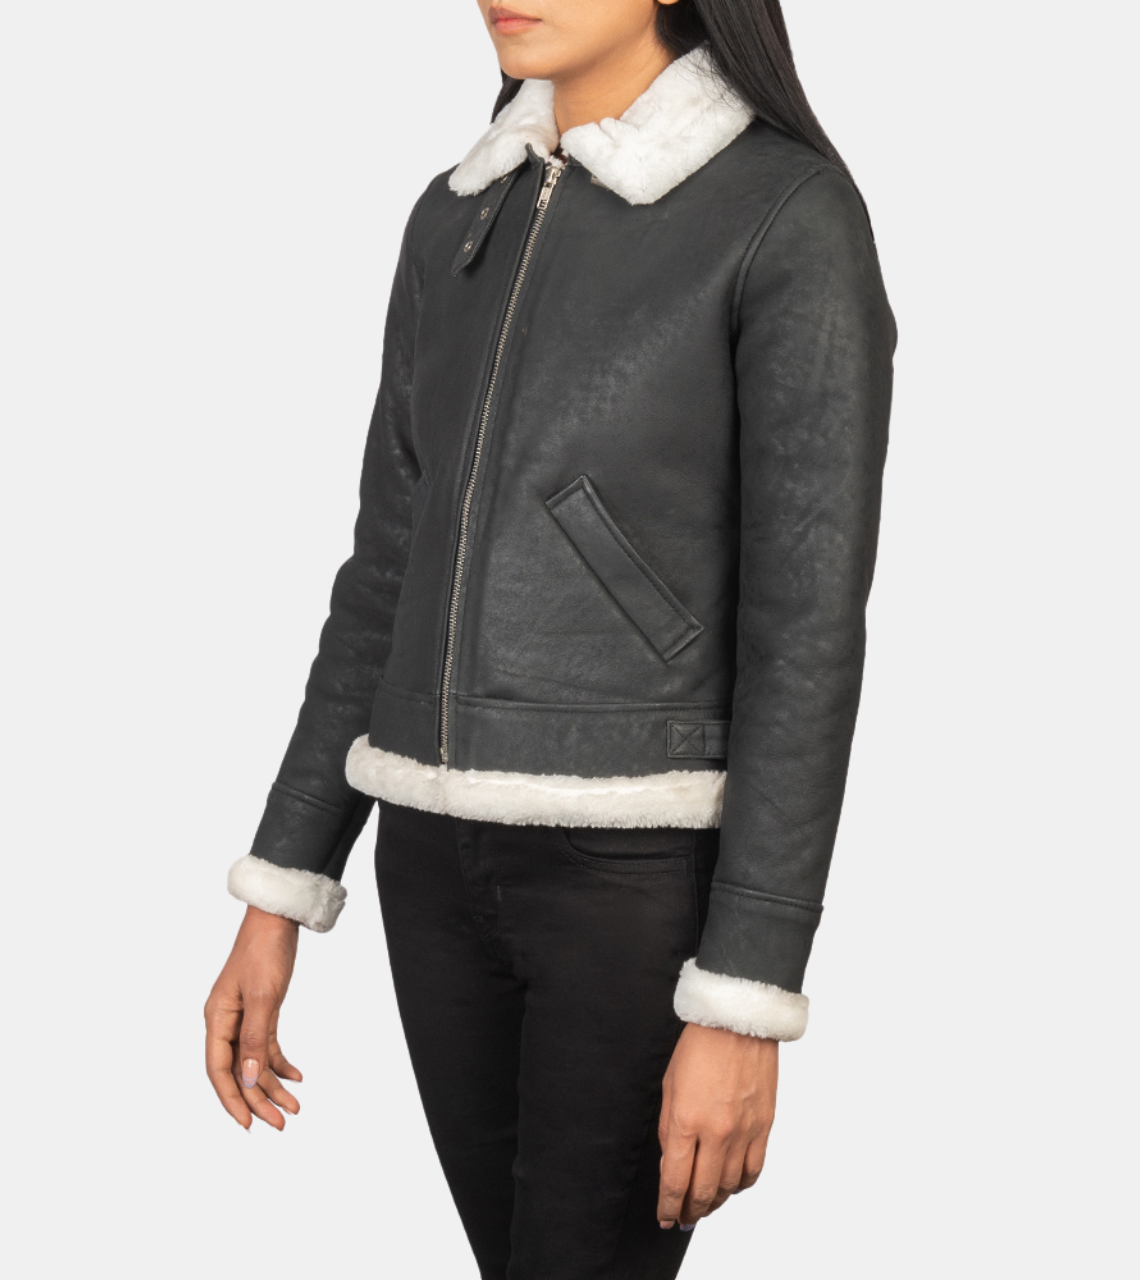 Maisiel Grey Bomber Shearling Leather Jacket For Women's